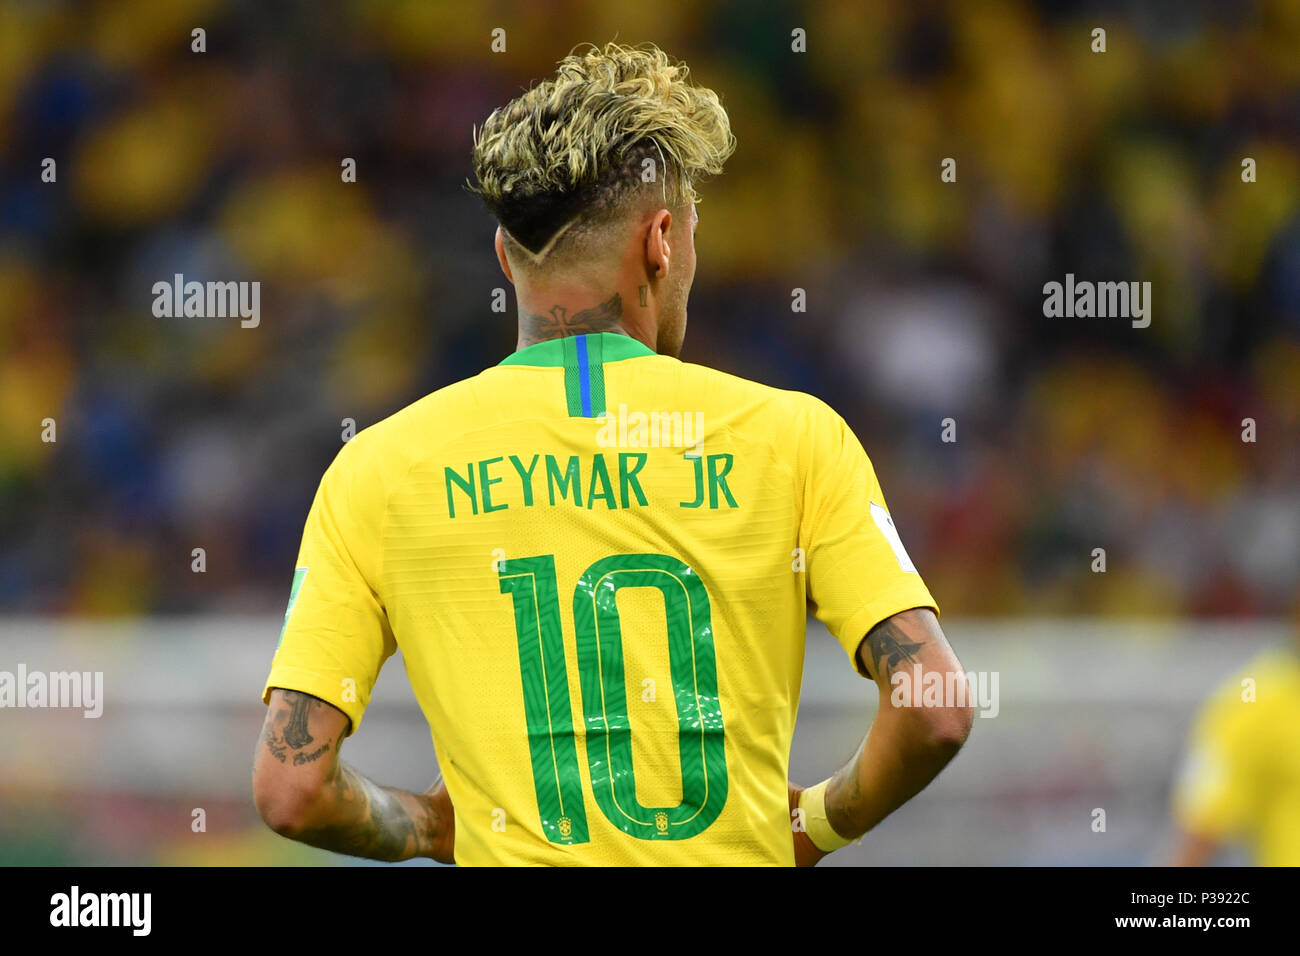 neymar (bra), rear view, back, hairstyle, action, single image